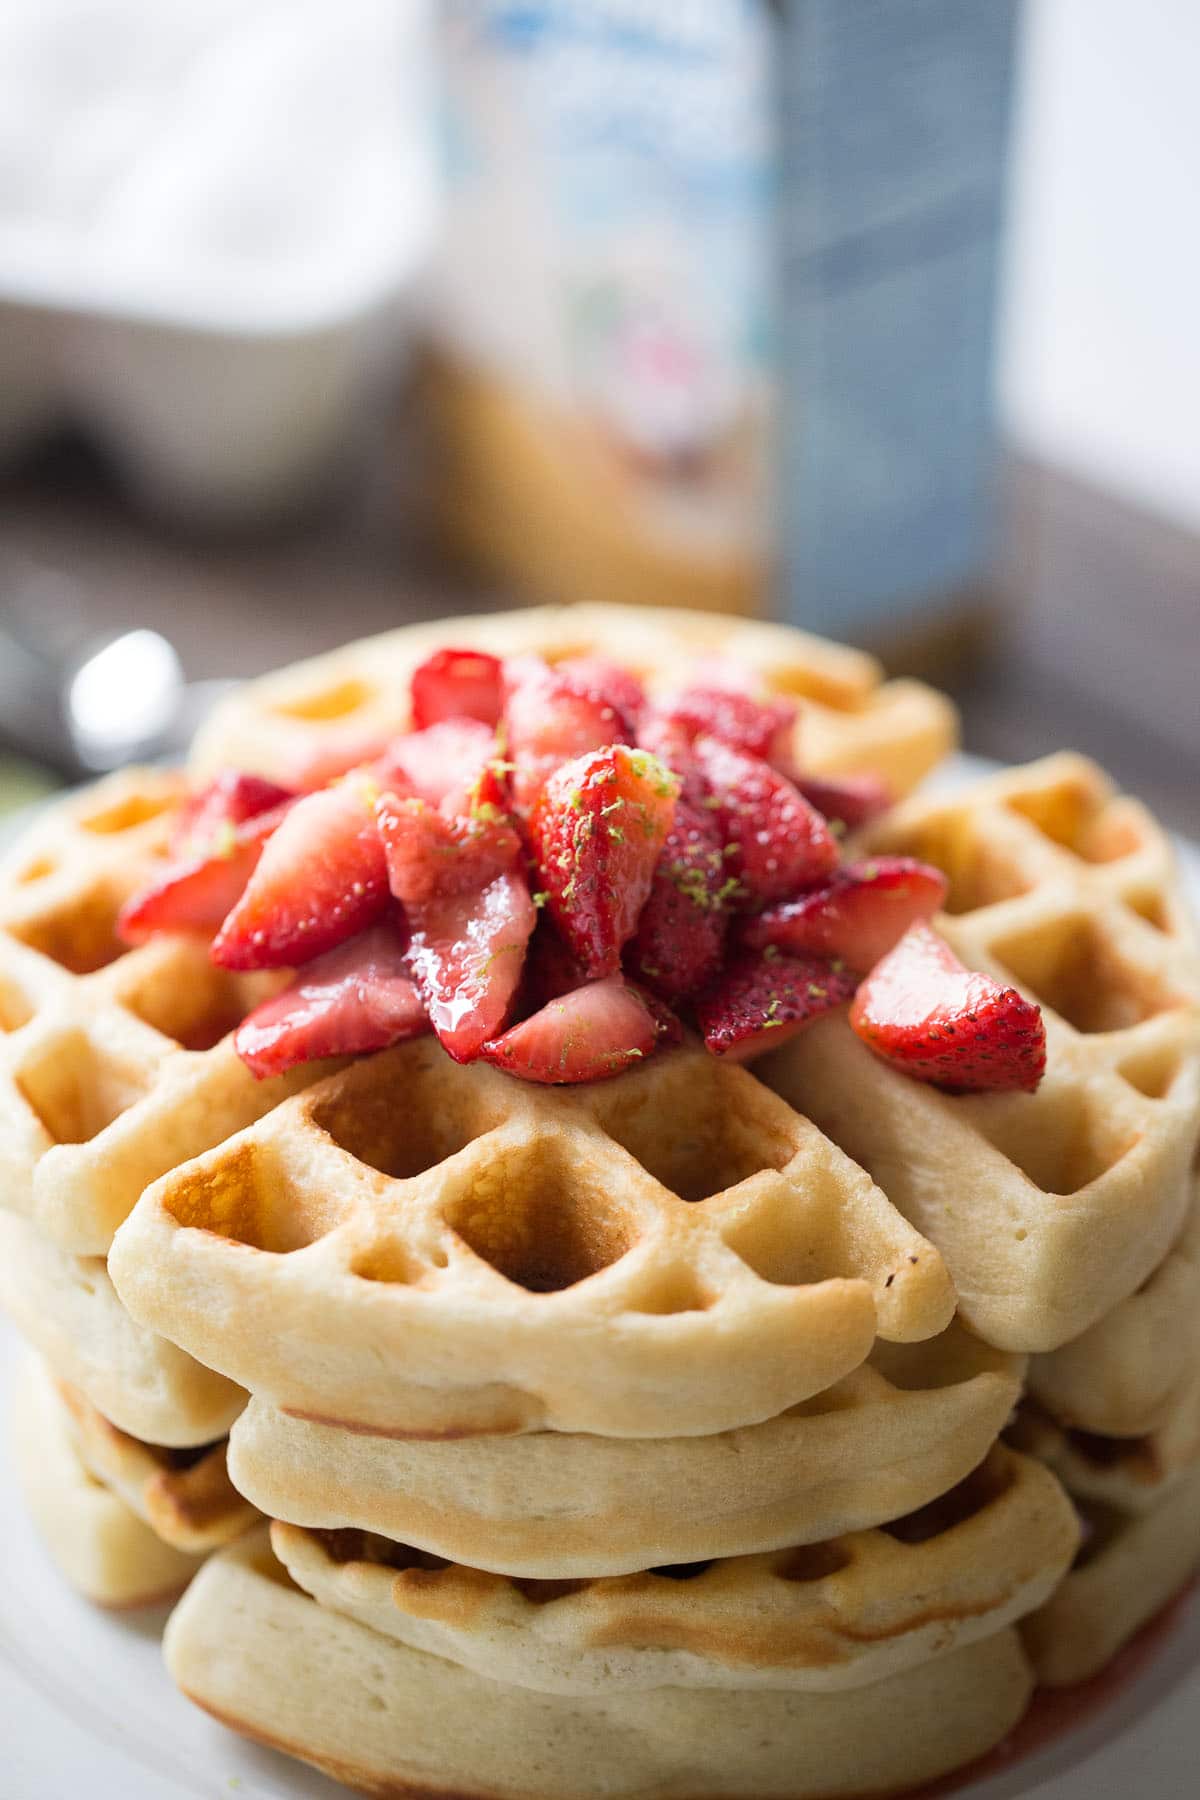 This key lime Belgian waffle recipe with it's fresh strawberry sauce are perfect for special occasions or lazy mornings!